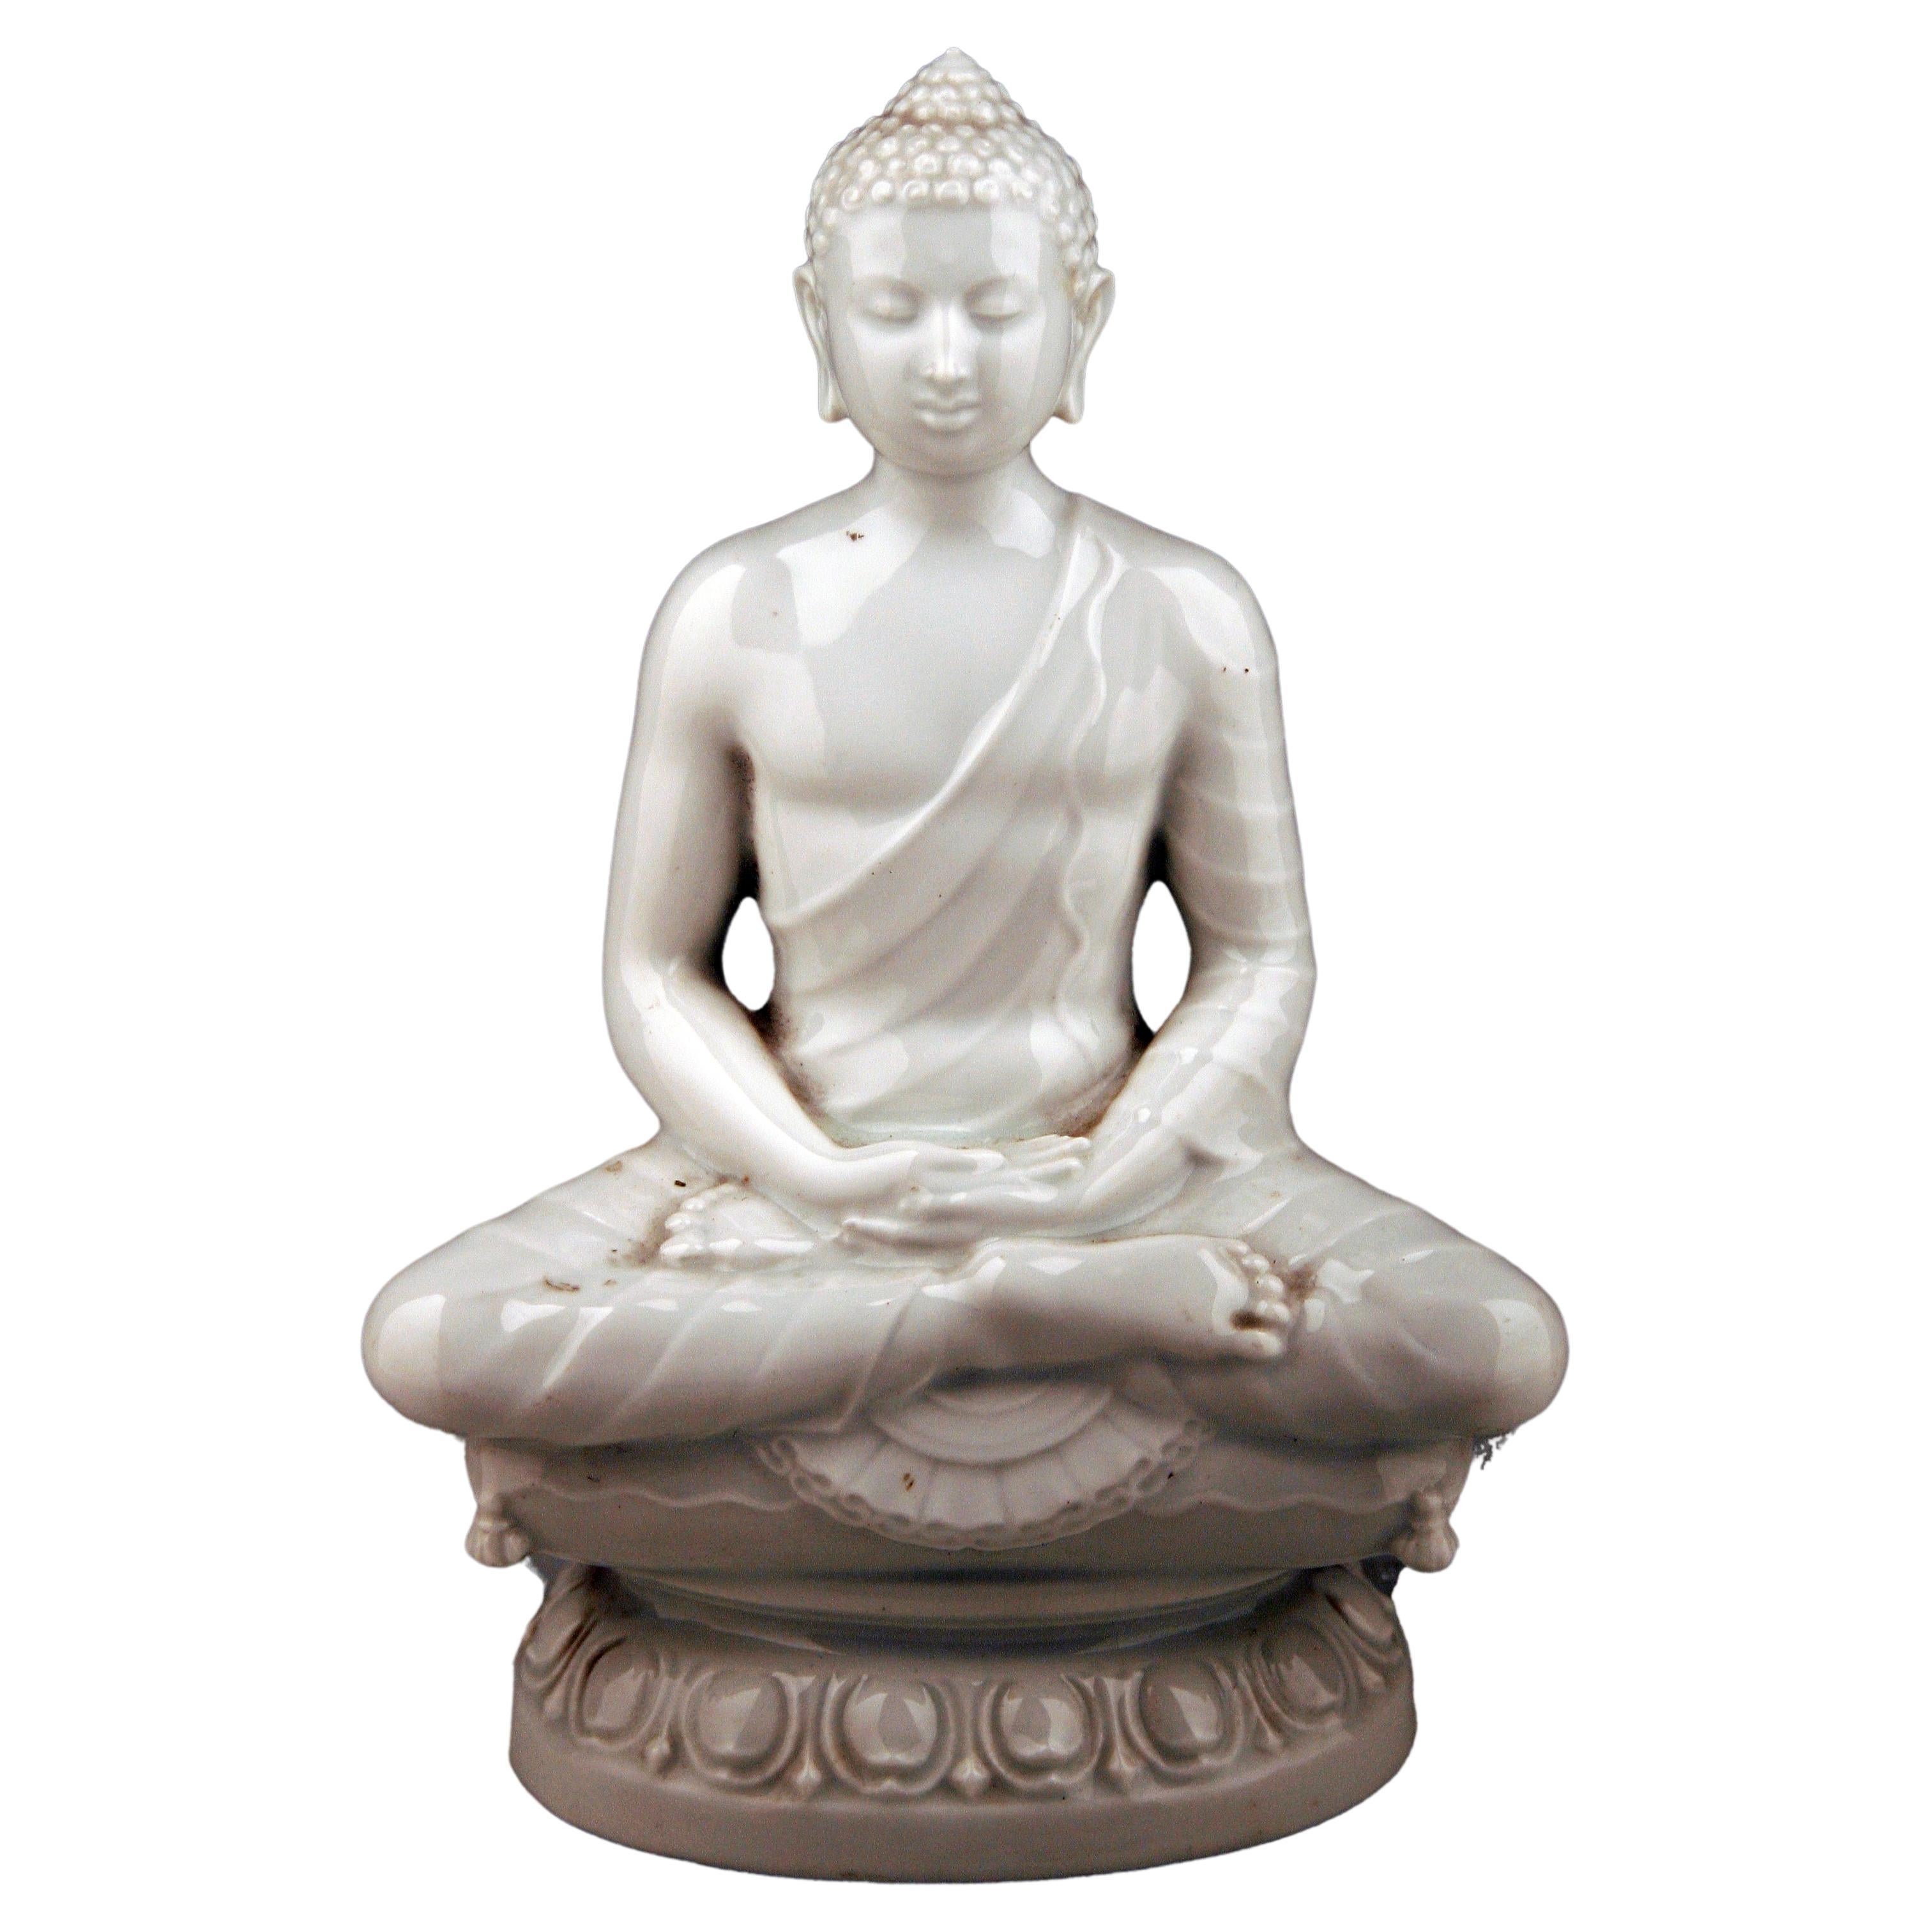 Art Déco German Glazed Porcelain Sculpture of a Sitting Buddha by Rosenthal For Sale